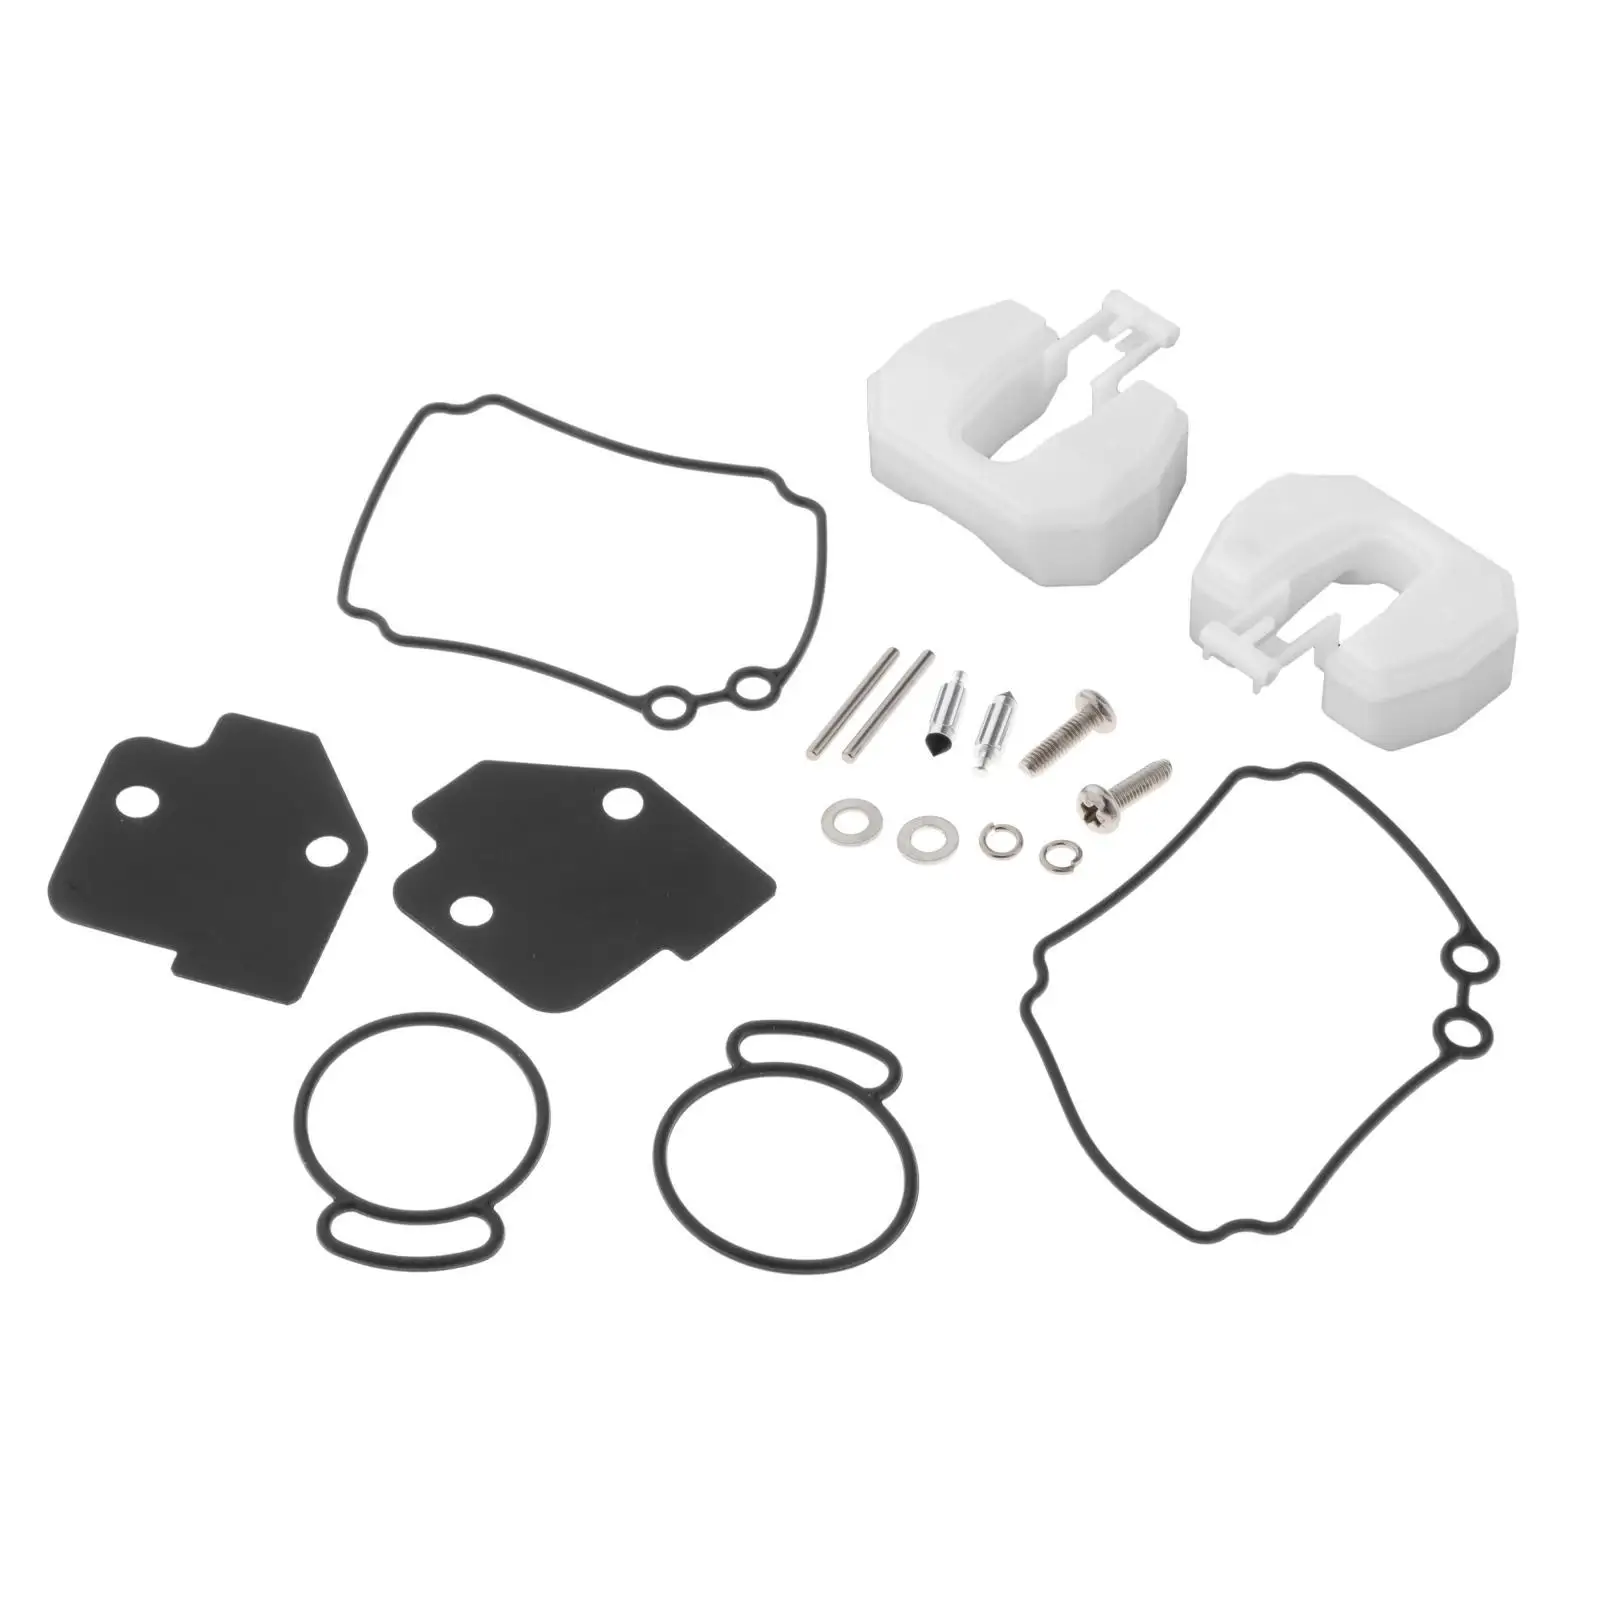 6L2-W0093-00-00 Carburetor Repair Kit Fit for Yamaha 2-Stroke Outboard Engine 20HP 25HP Replaces Accessories